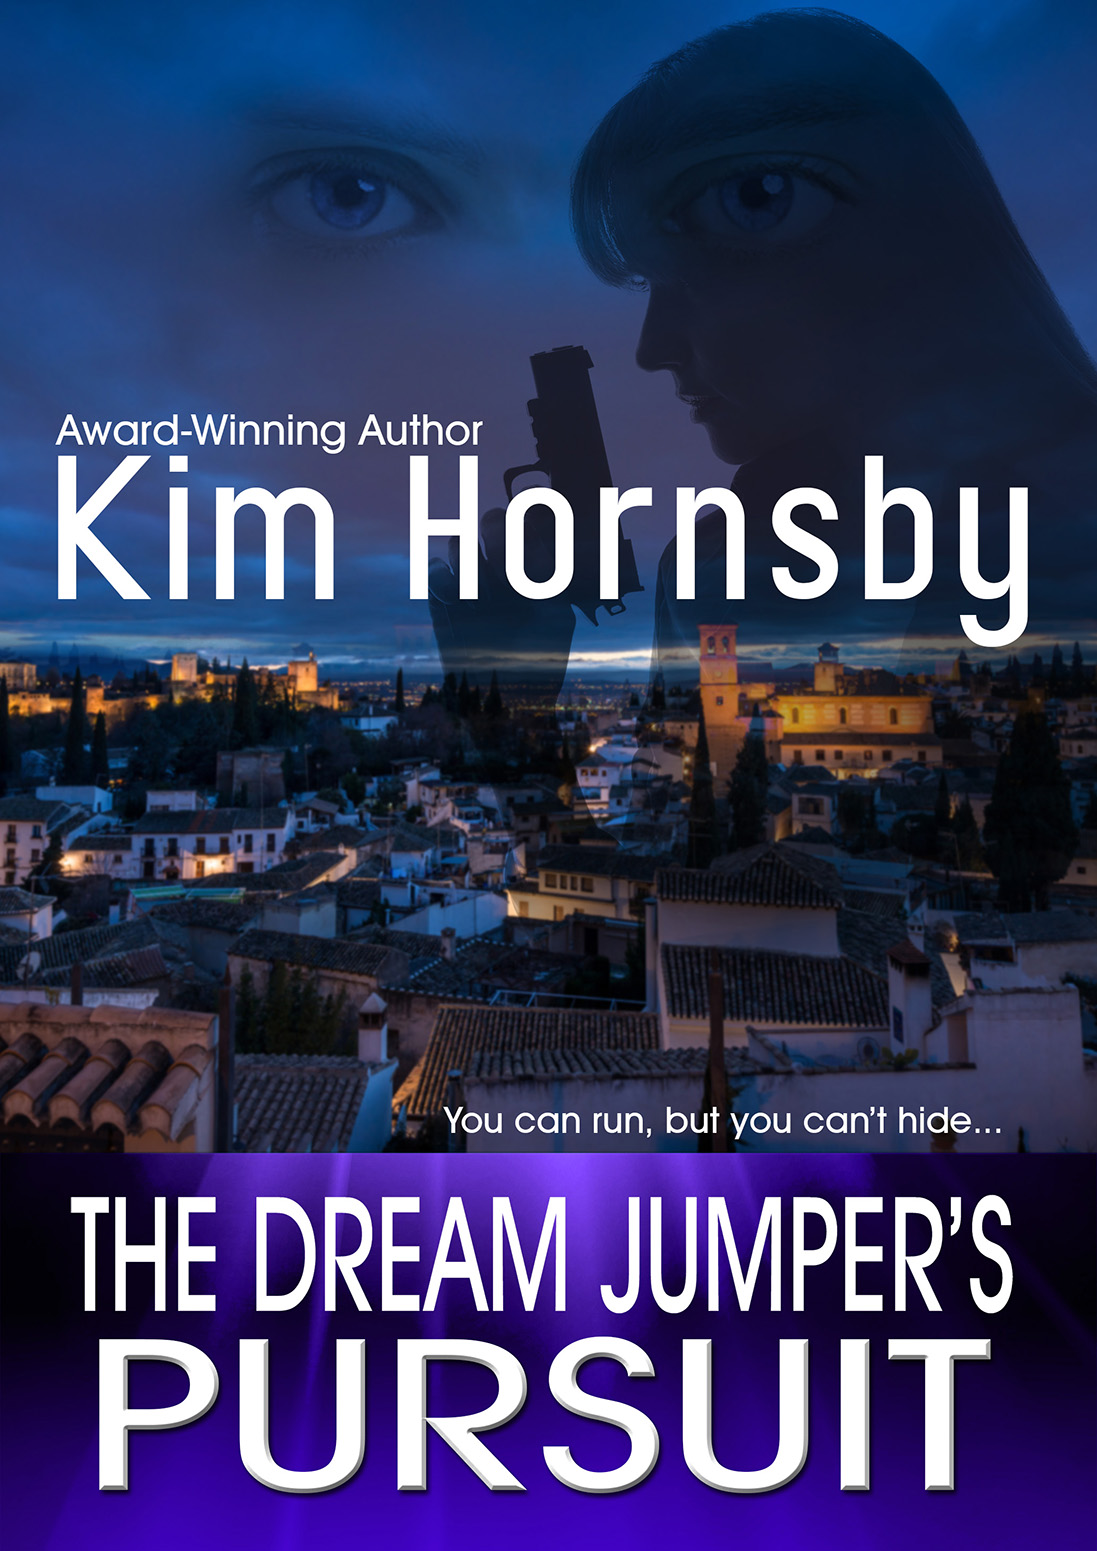 The Dream Jumper’s Pursuit by Kim Hornsby